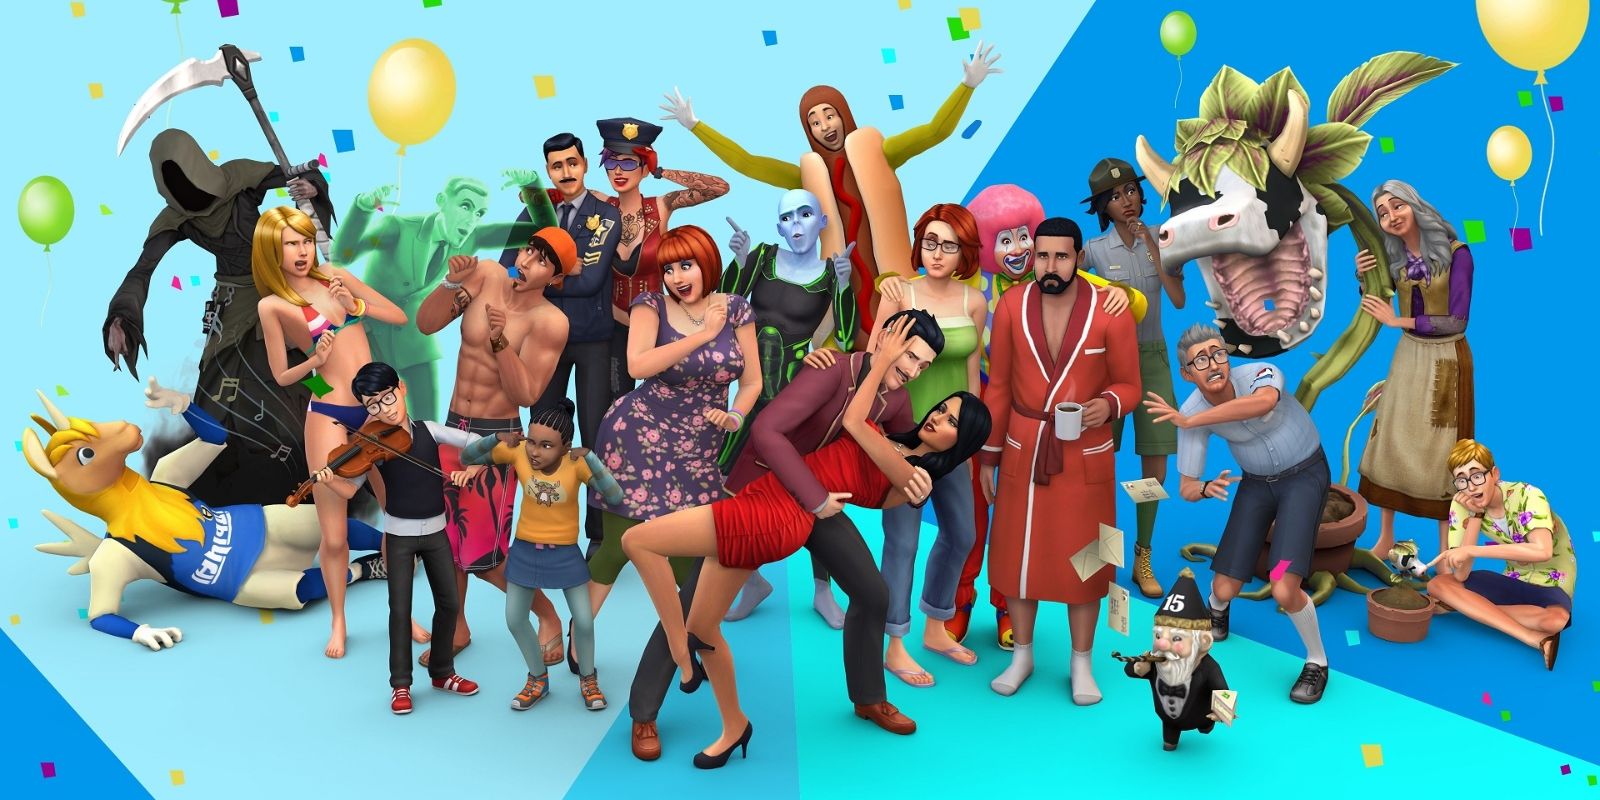 The Sims 4 group of characters